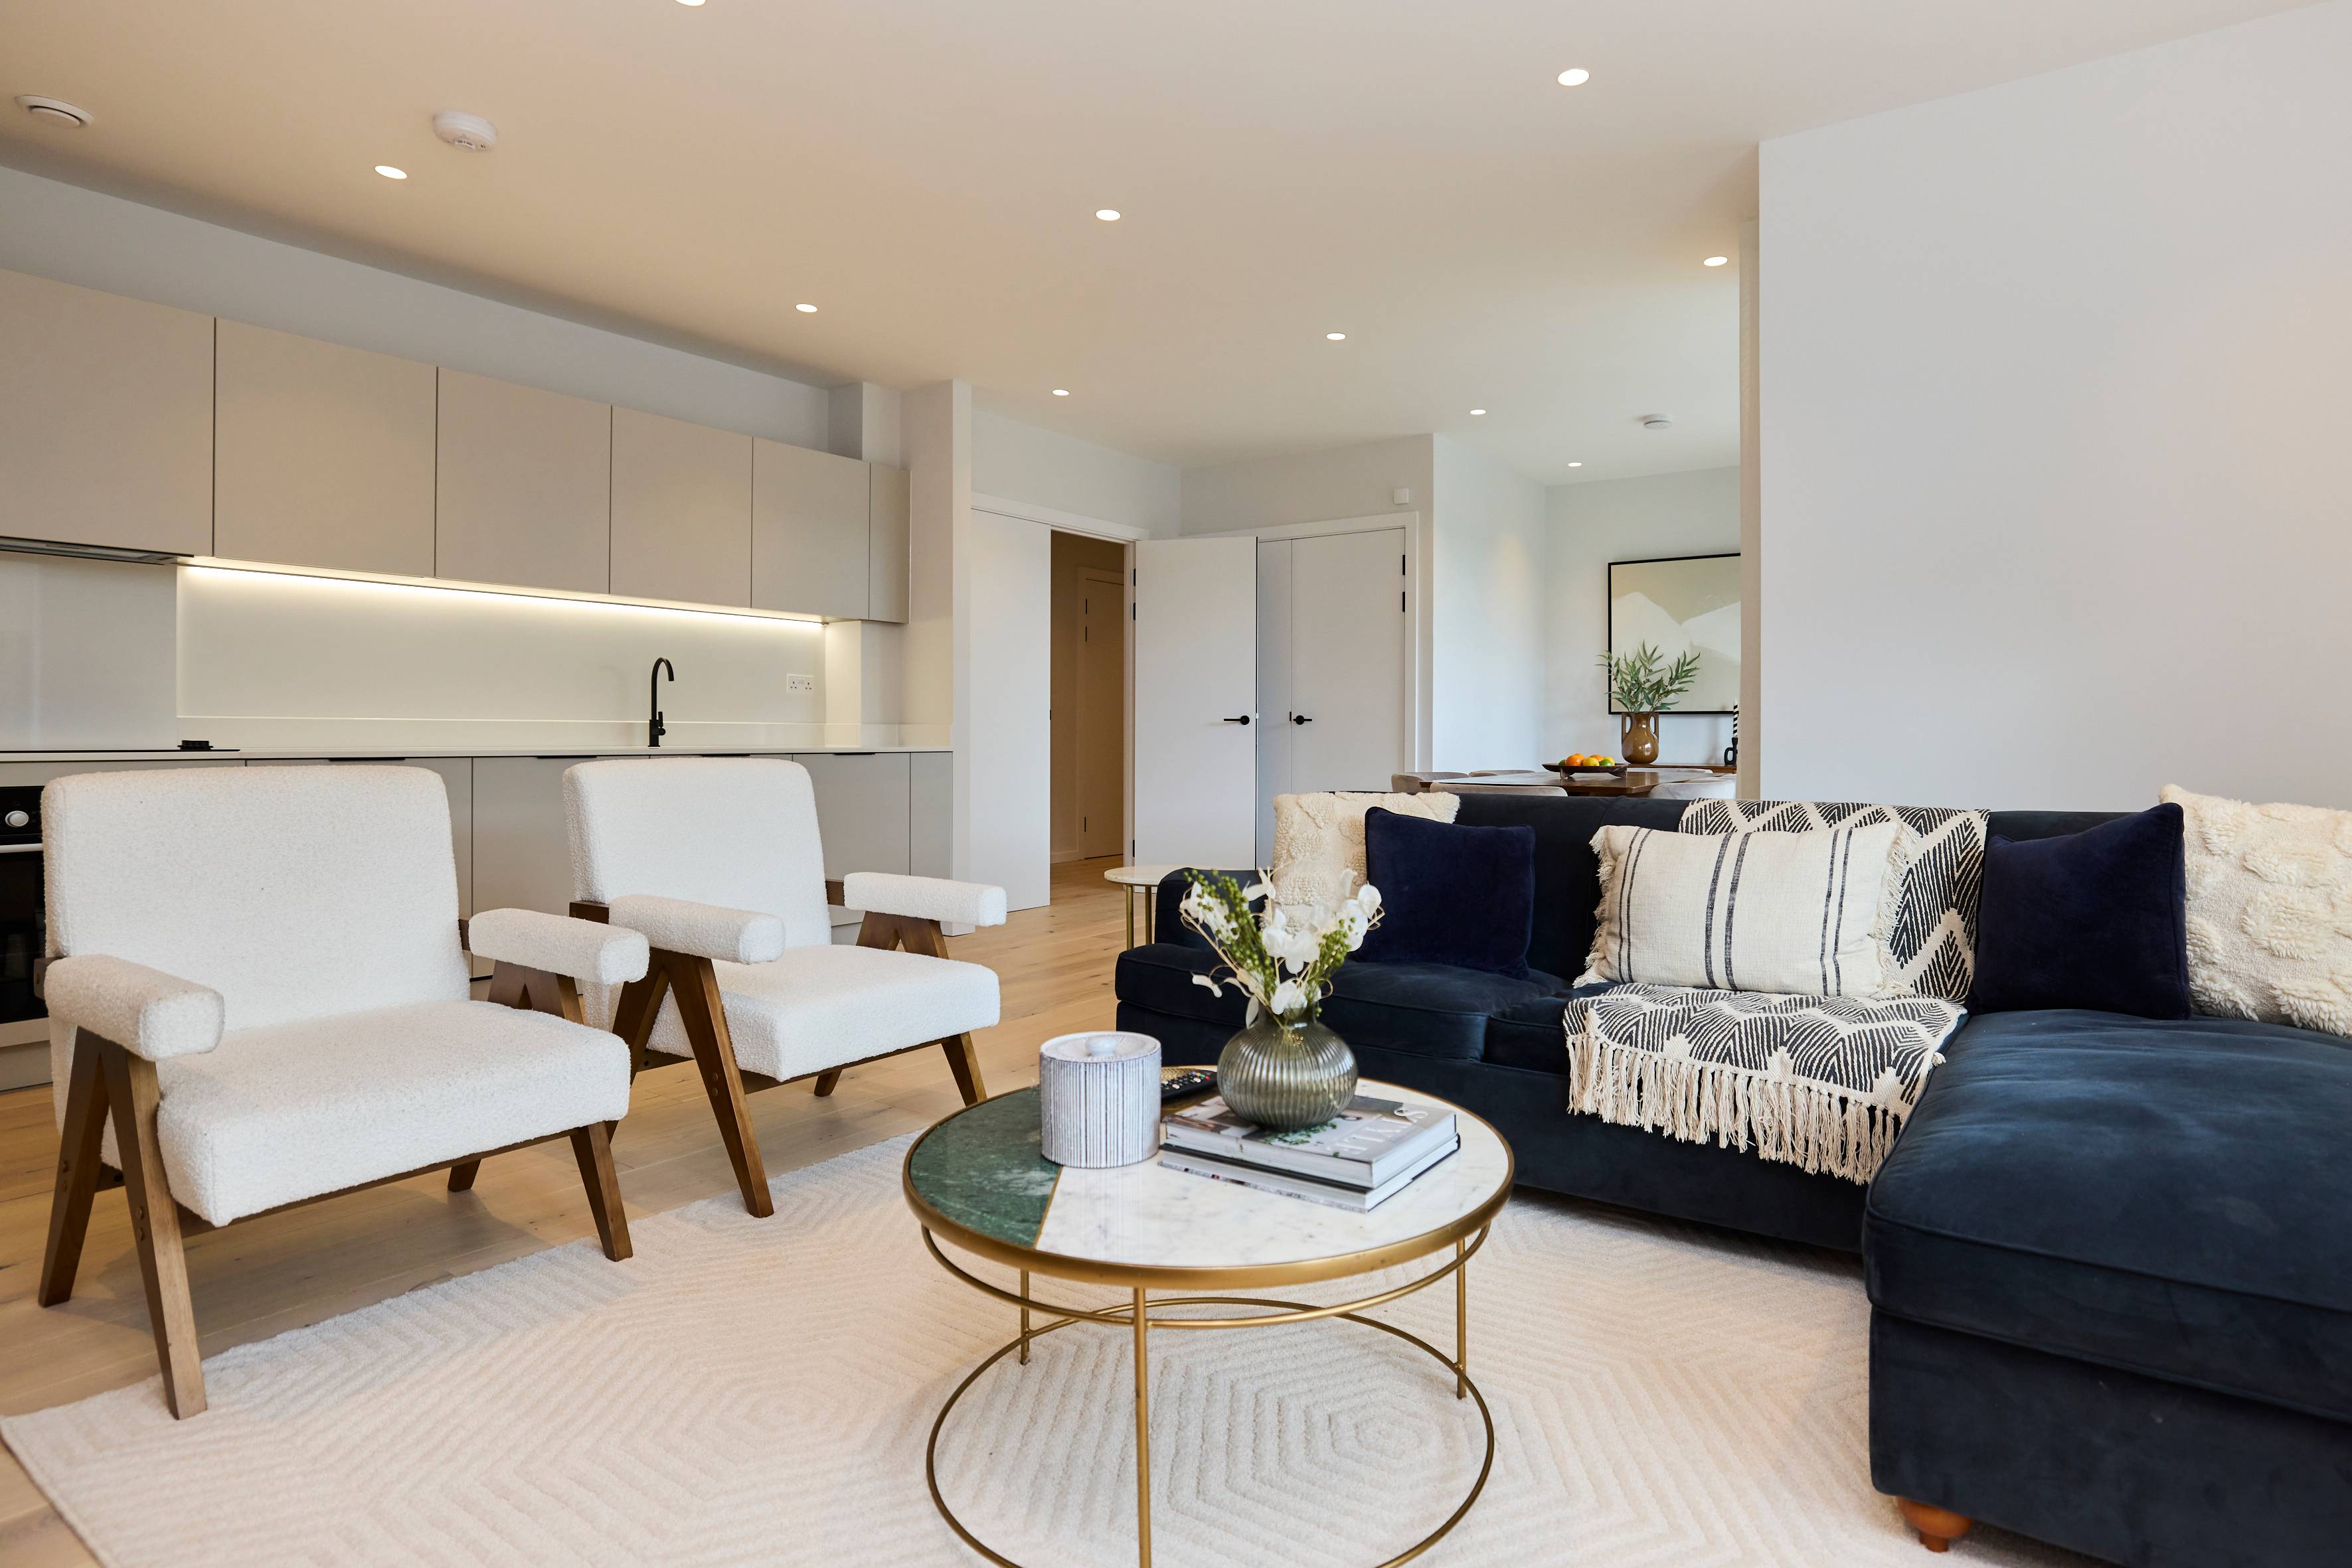 Brand new elegant two-bedroom apartment in vibrant North-West London